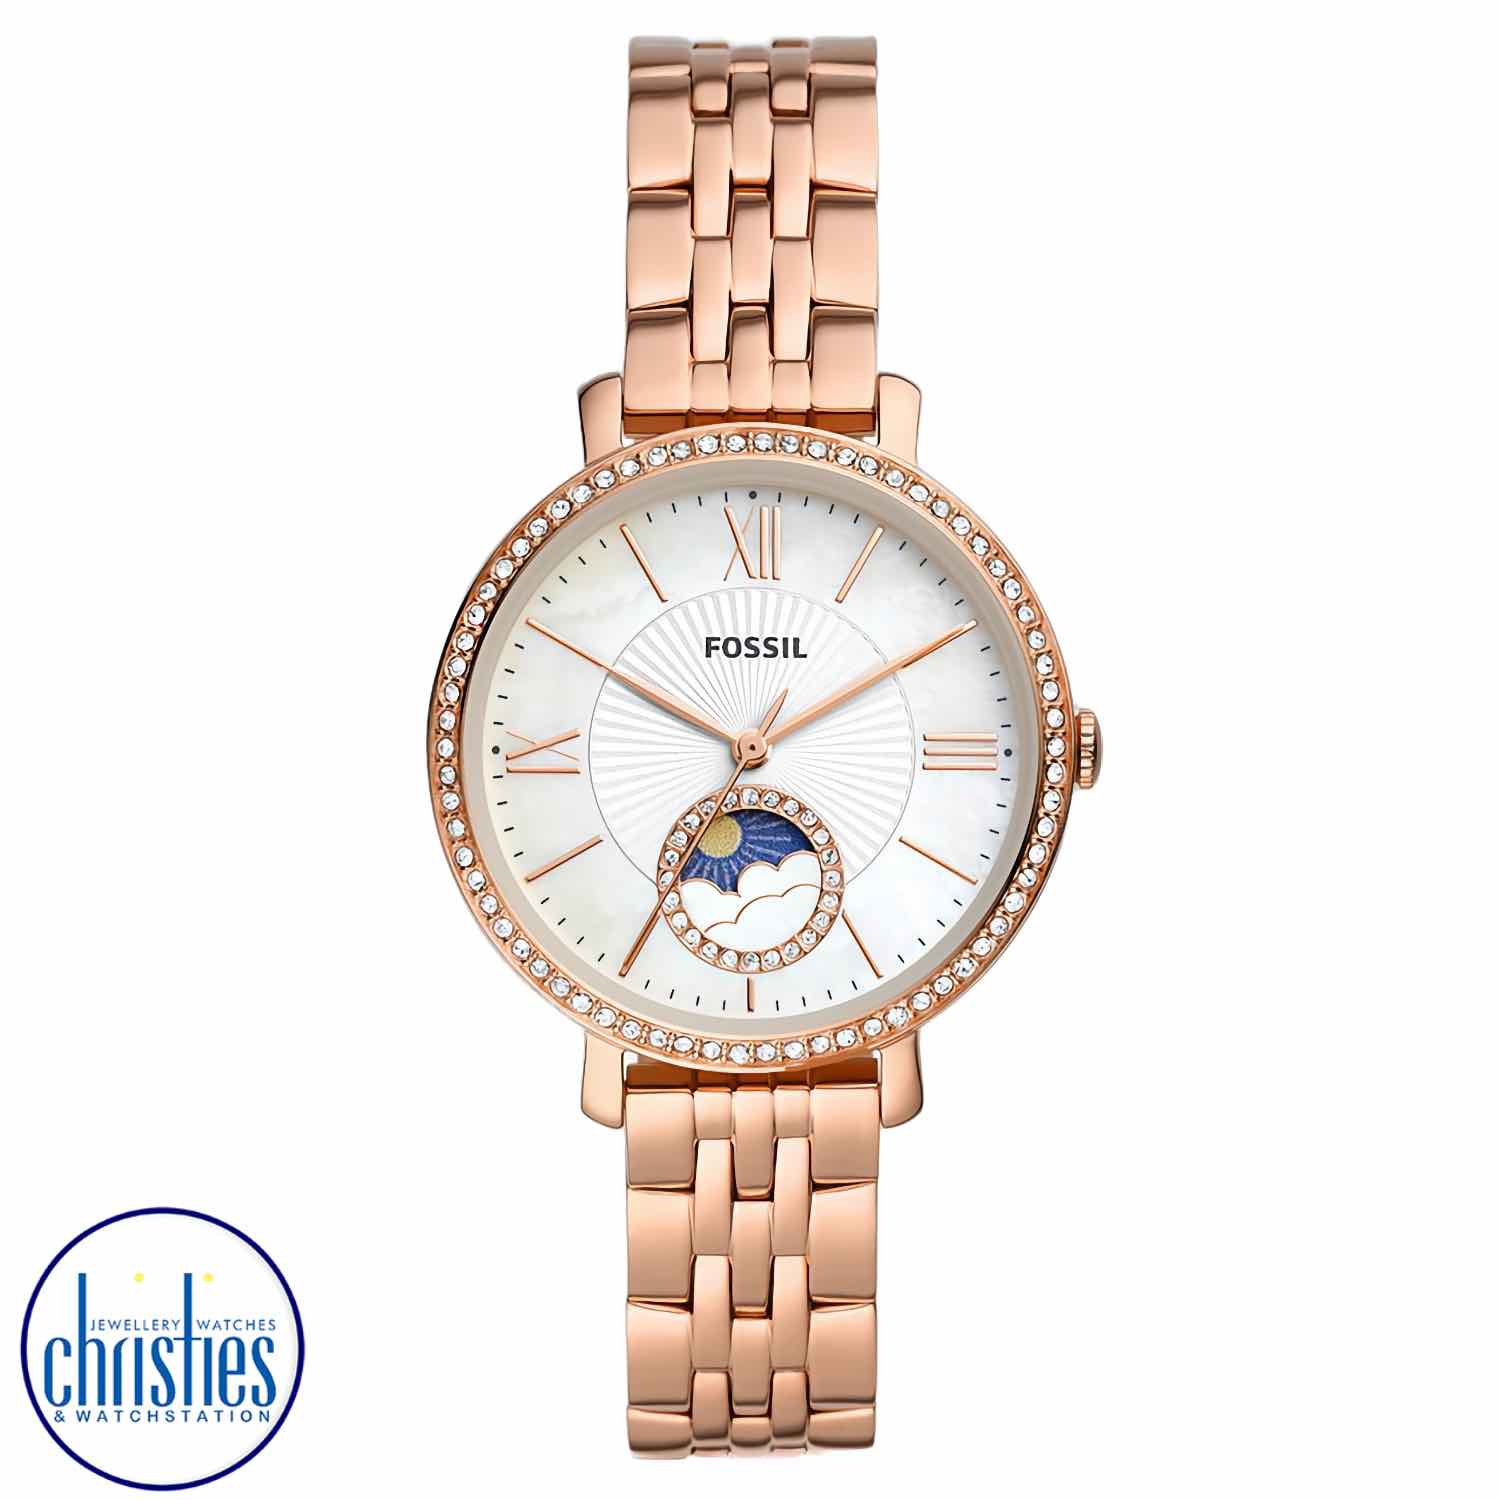 ES5165 Fossil Jacqueline Sun Moon Multifunction Rose Gold-Tone Stainless Steel Watch. ES5165 Fossil Jacqueline Sun Moon Multifunction Rose Gold-Tone Stainless Steel WatchAfterpay - Split your purchase into 4 instalments - Pay for your purchase over 4 inst